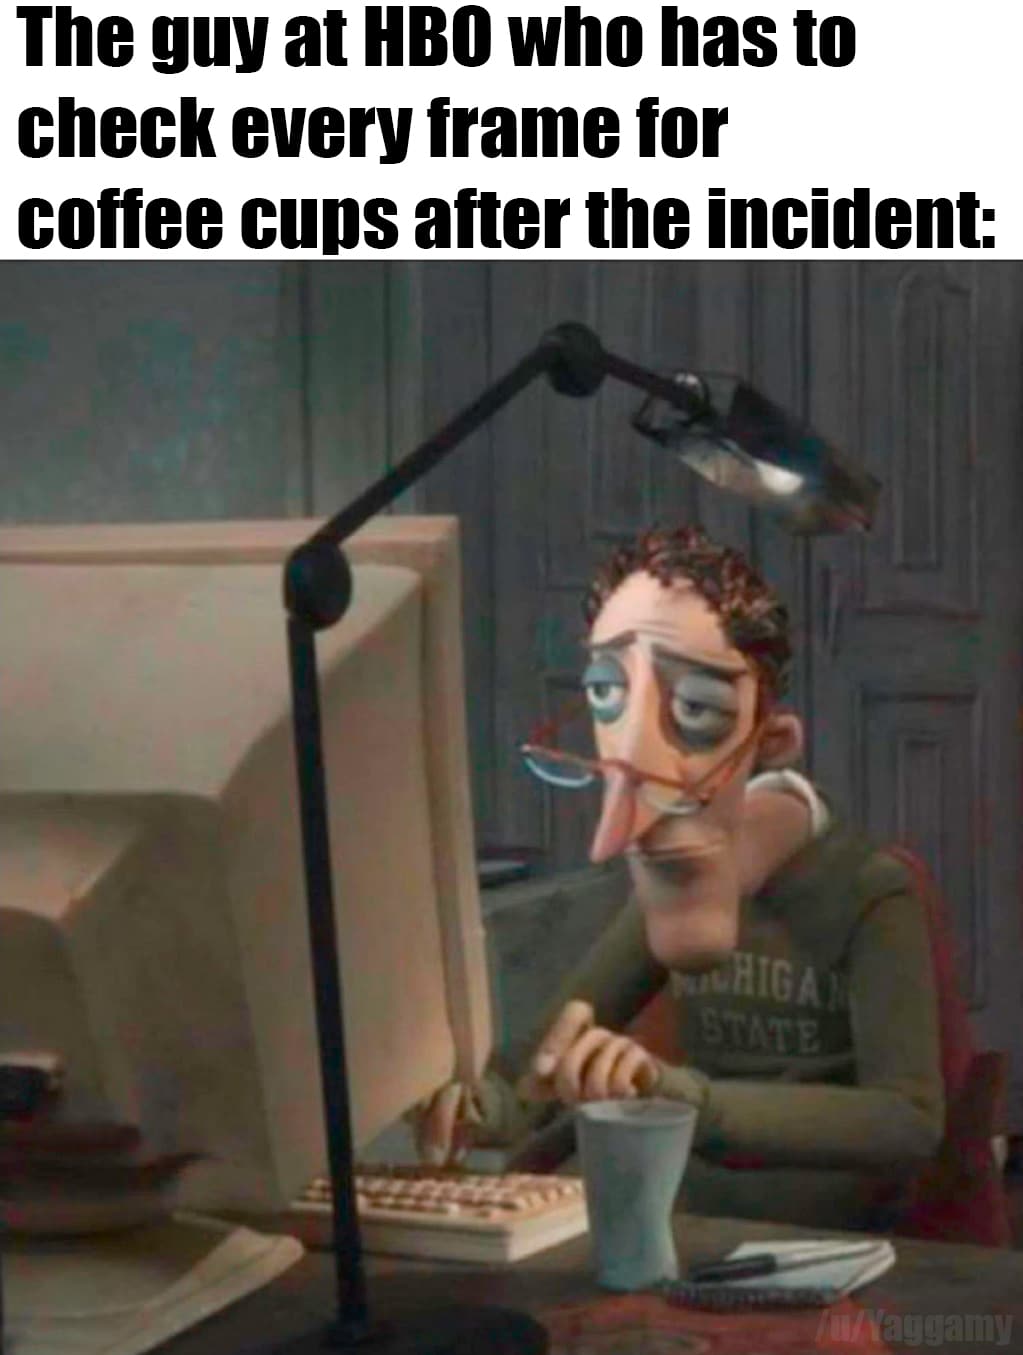 Game of thrones, Check Game of thrones memes Game of thrones, Check text: The guy at HBO who has to check every frame for coffee cups after the incident: 